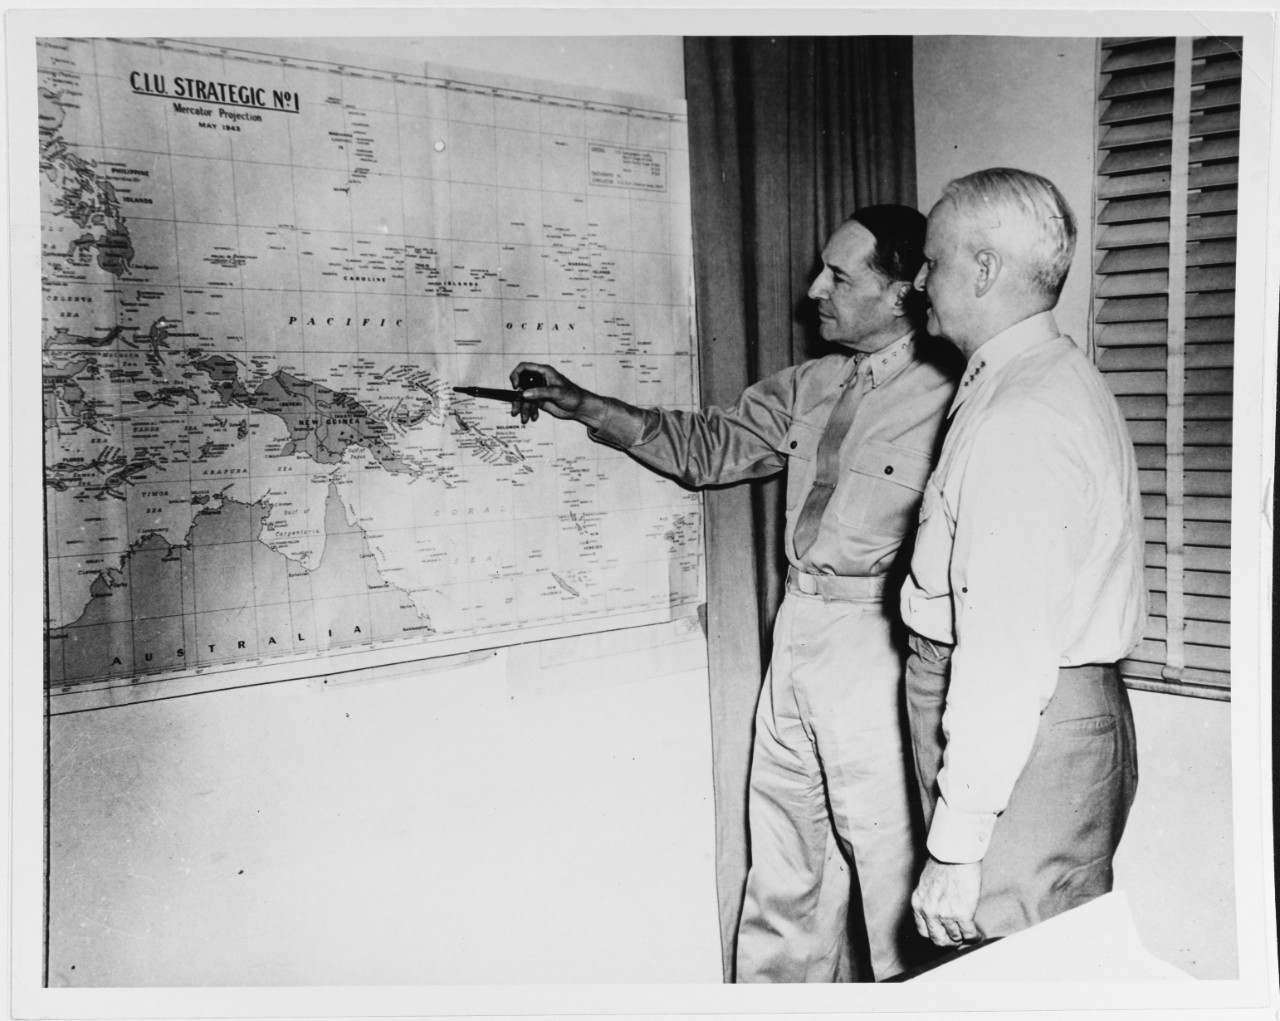 Photo #: SC 190409  General Douglas MacArthur, Supreme Commander, Allied Forces, Southwest Pacific Area, and Admiral Chester W. Nimitz, Commander in Chief, Pacific